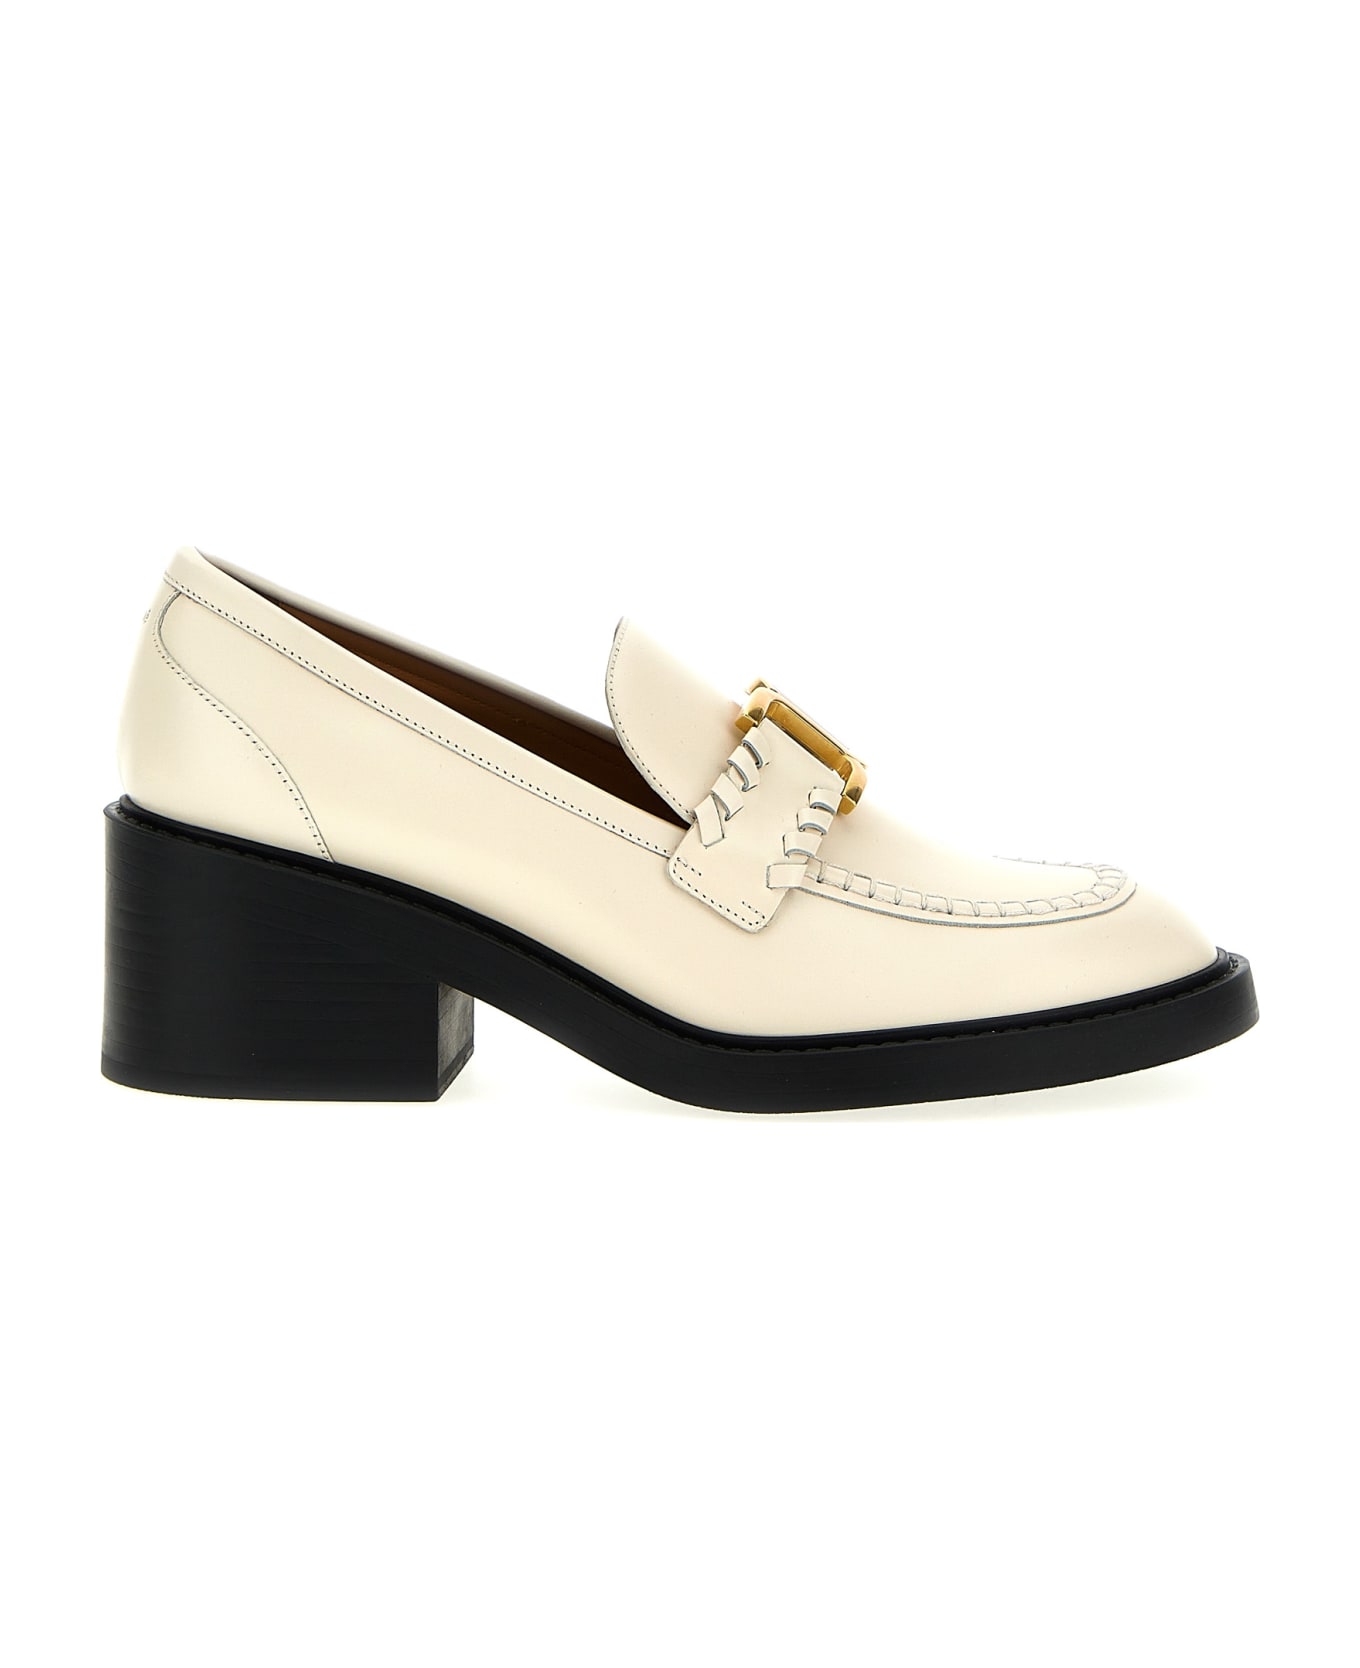 Chloé Marcie Loafers - White ハイヒール